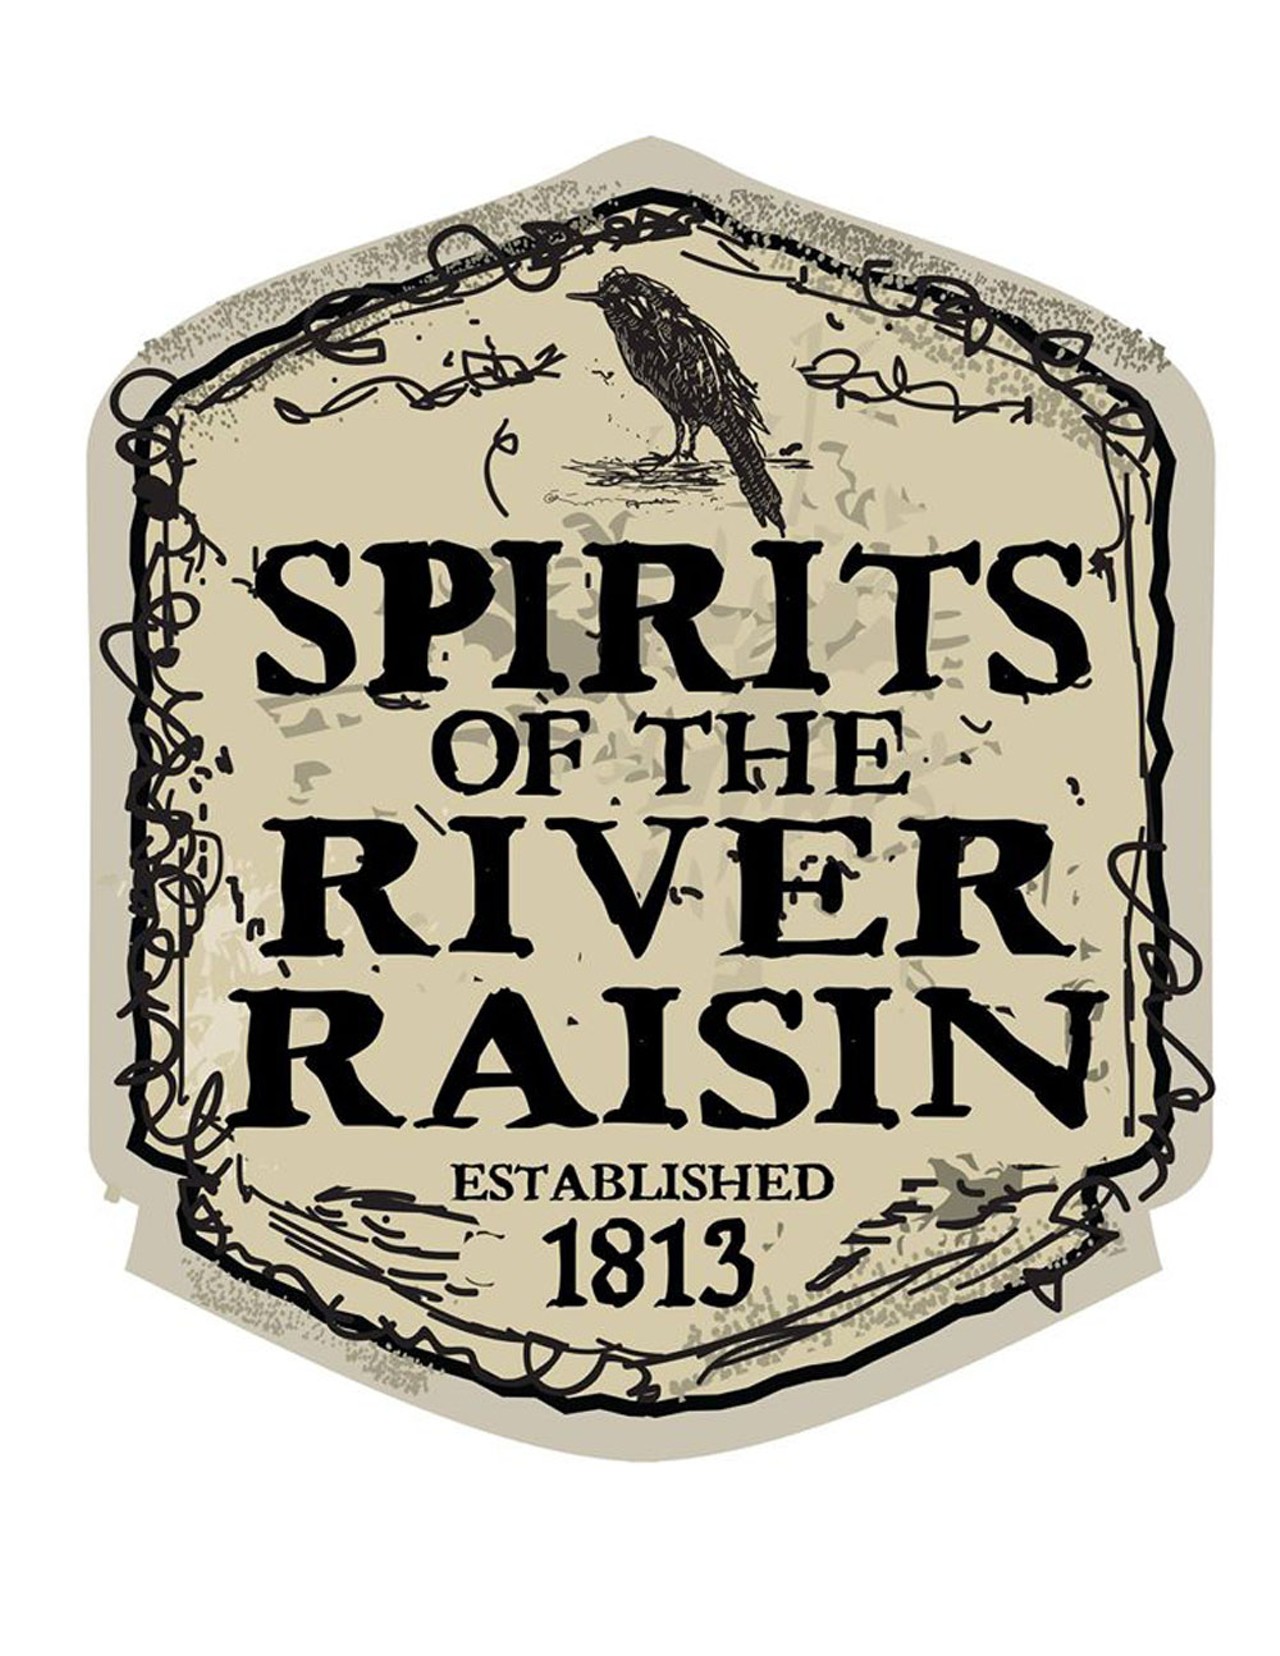 Spirits of the River Raisin
Located in the River Raisin National Battlefield Park in Monroe, you will get to hear ghost stories of this famous Battlefield. This one you can bring the kids to as it is not as spooky. There will even be a trick or treat so bring those fun costumes. October 22 @ River Raisin National Battlefield Park. Free admission, too!